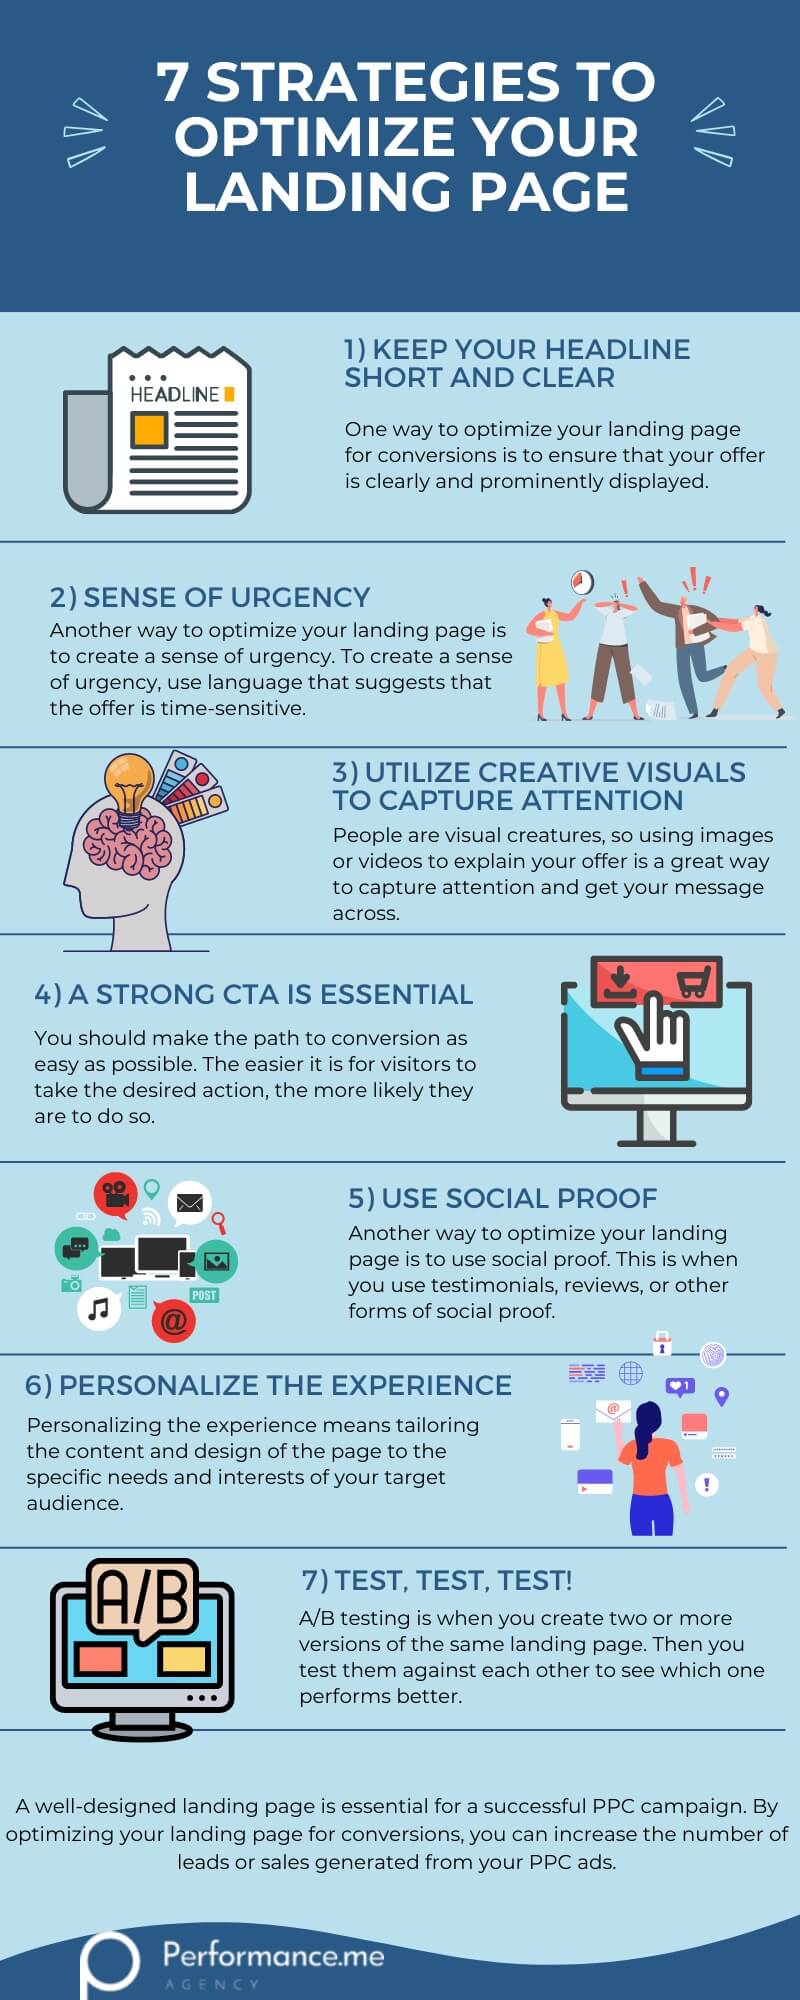 infographic explaining 7 strategies to optimize your landing page for better results while running PPC ads